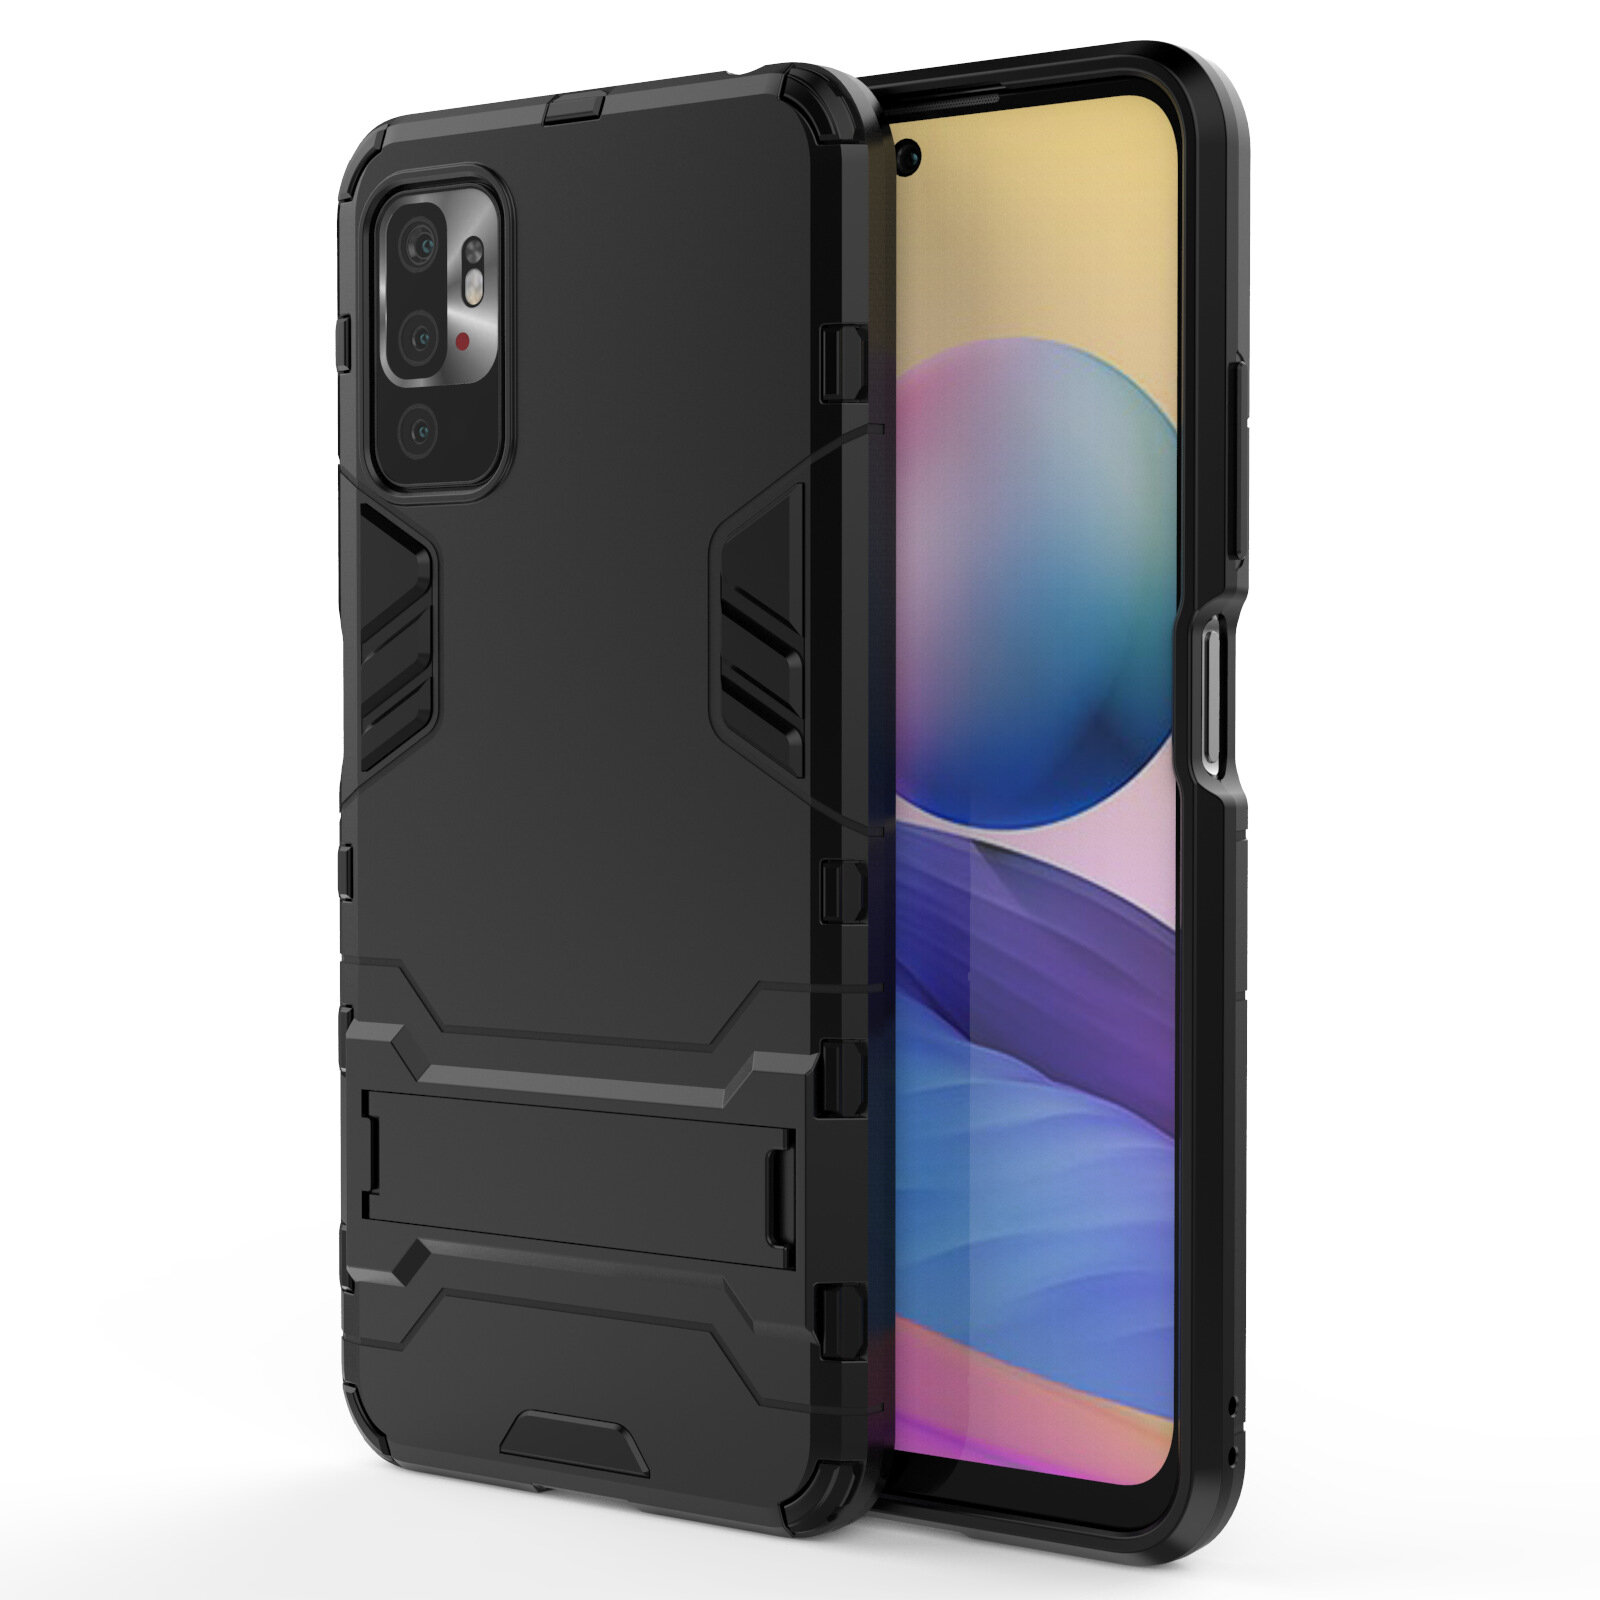 Bakeey for POCO M3 Pro 5G NFC Global Version/ Xiaomi Redmi Note 10 5G Case Armor with Bracket Shockp